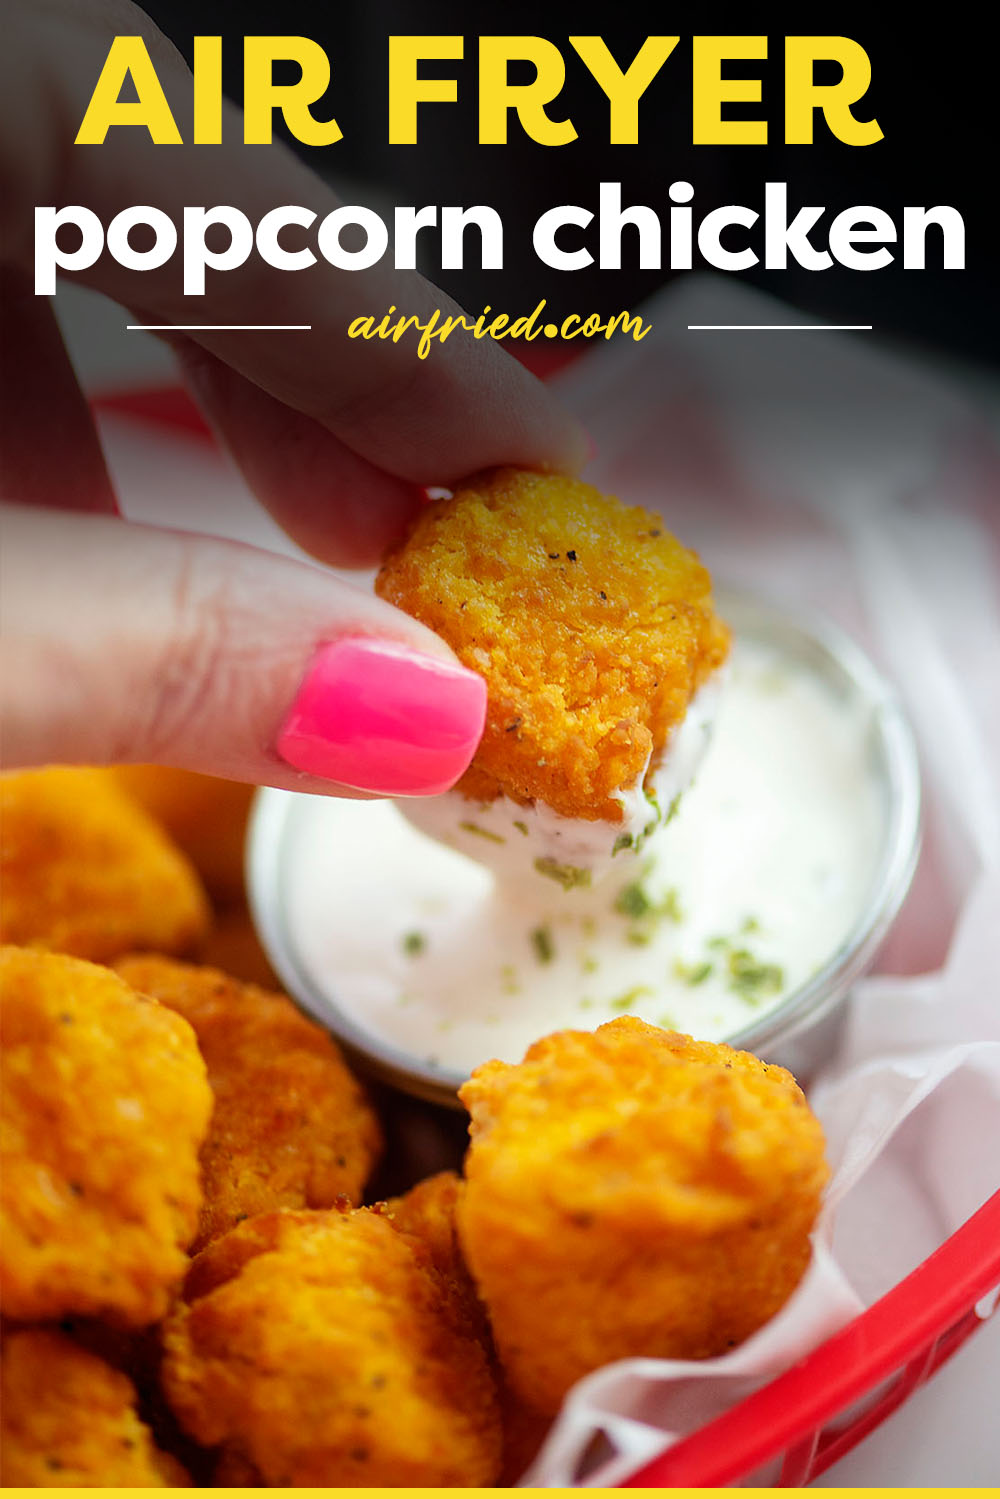 Air Fryer Popcorn Chicken is so easy! You can air fry it right from the freezer and it gets perfectly crispy in just 10 minutes. So much better than baked! Serve this popcorn chicken with your favorite sauce or dressing.